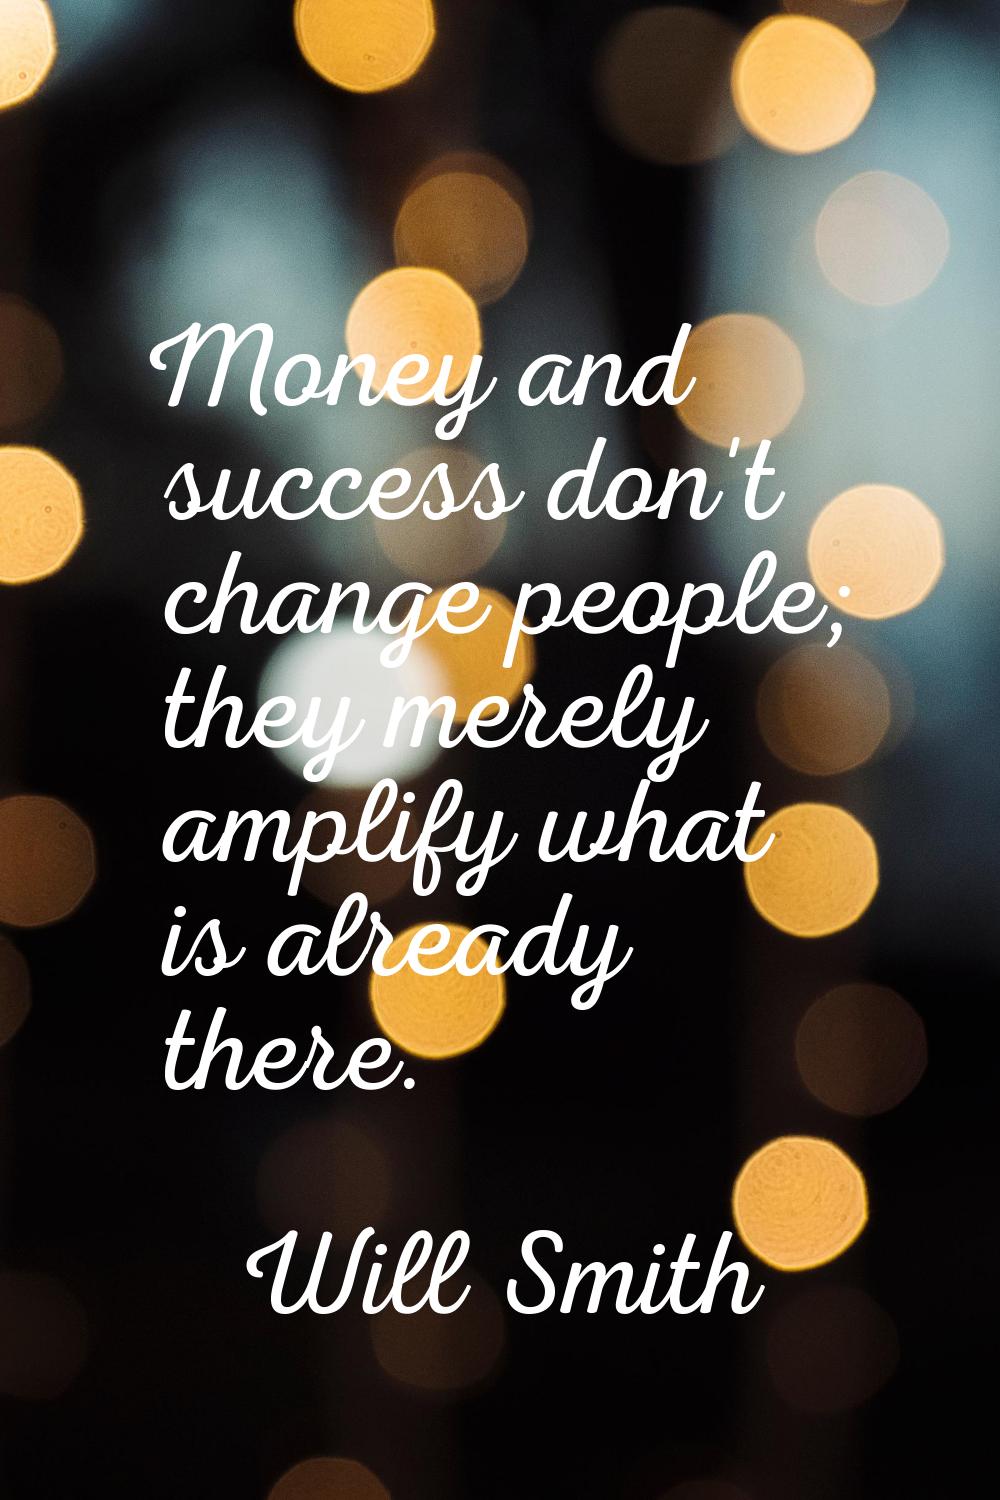 Money and success don't change people; they merely amplify what is already there.